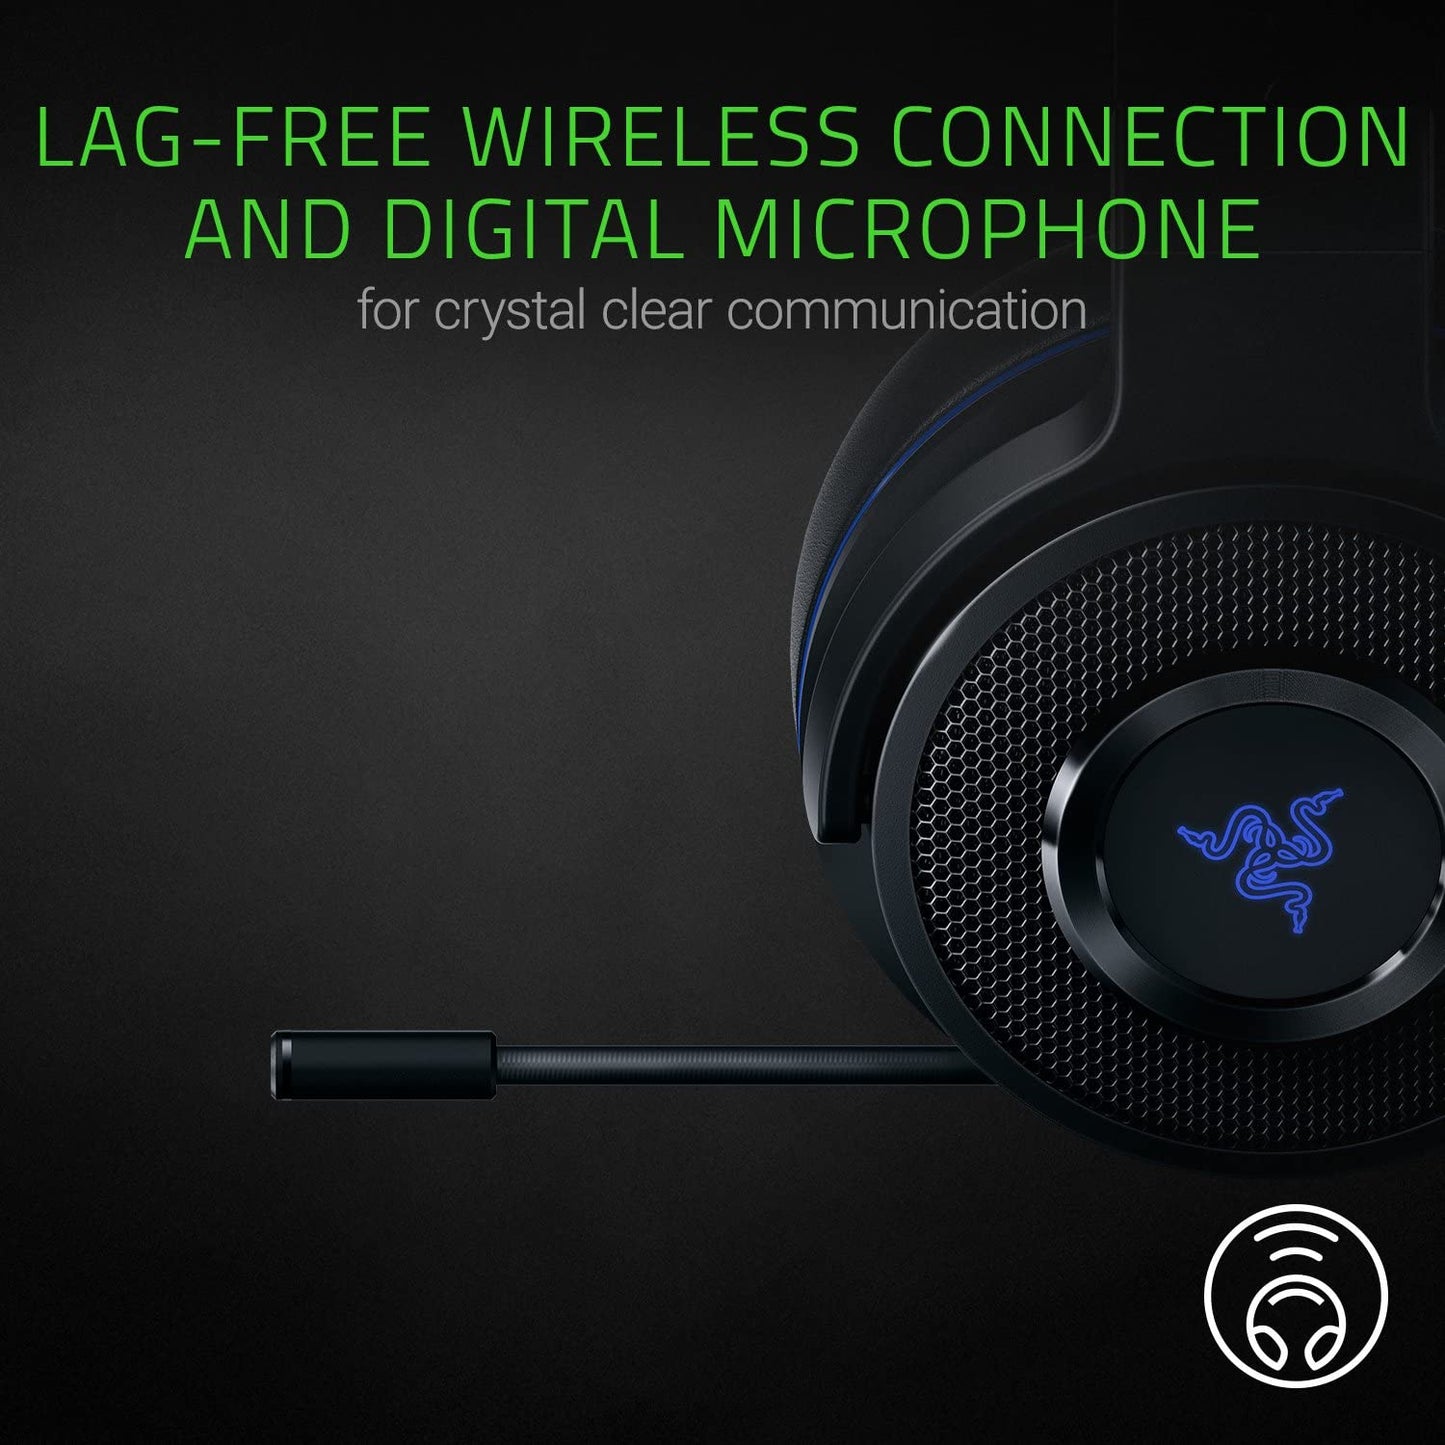 Razer Thresher 7.1 Ultimate for (PS5/PS4) Lag-Free Wireless Connection